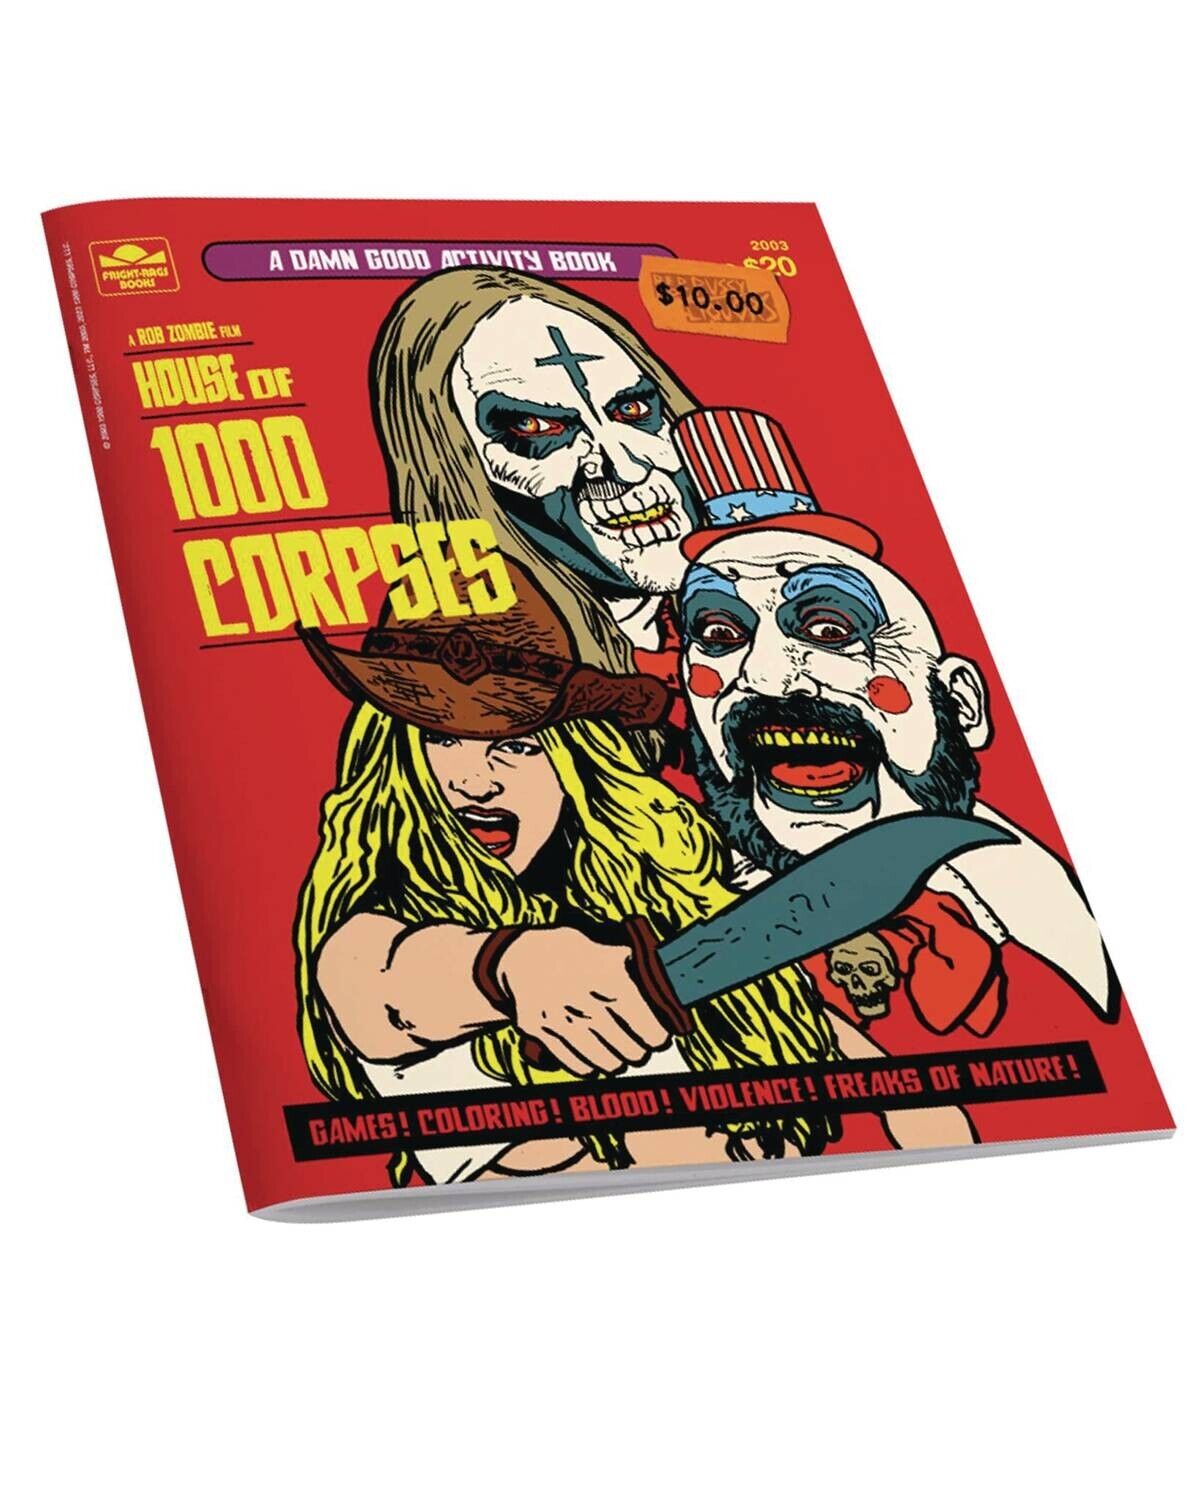 ⚰️ HOUSE OF 1000 CORPSES ACTIVITY BOOK BY FRIGHT RAGS *7/31/24 PRESALE